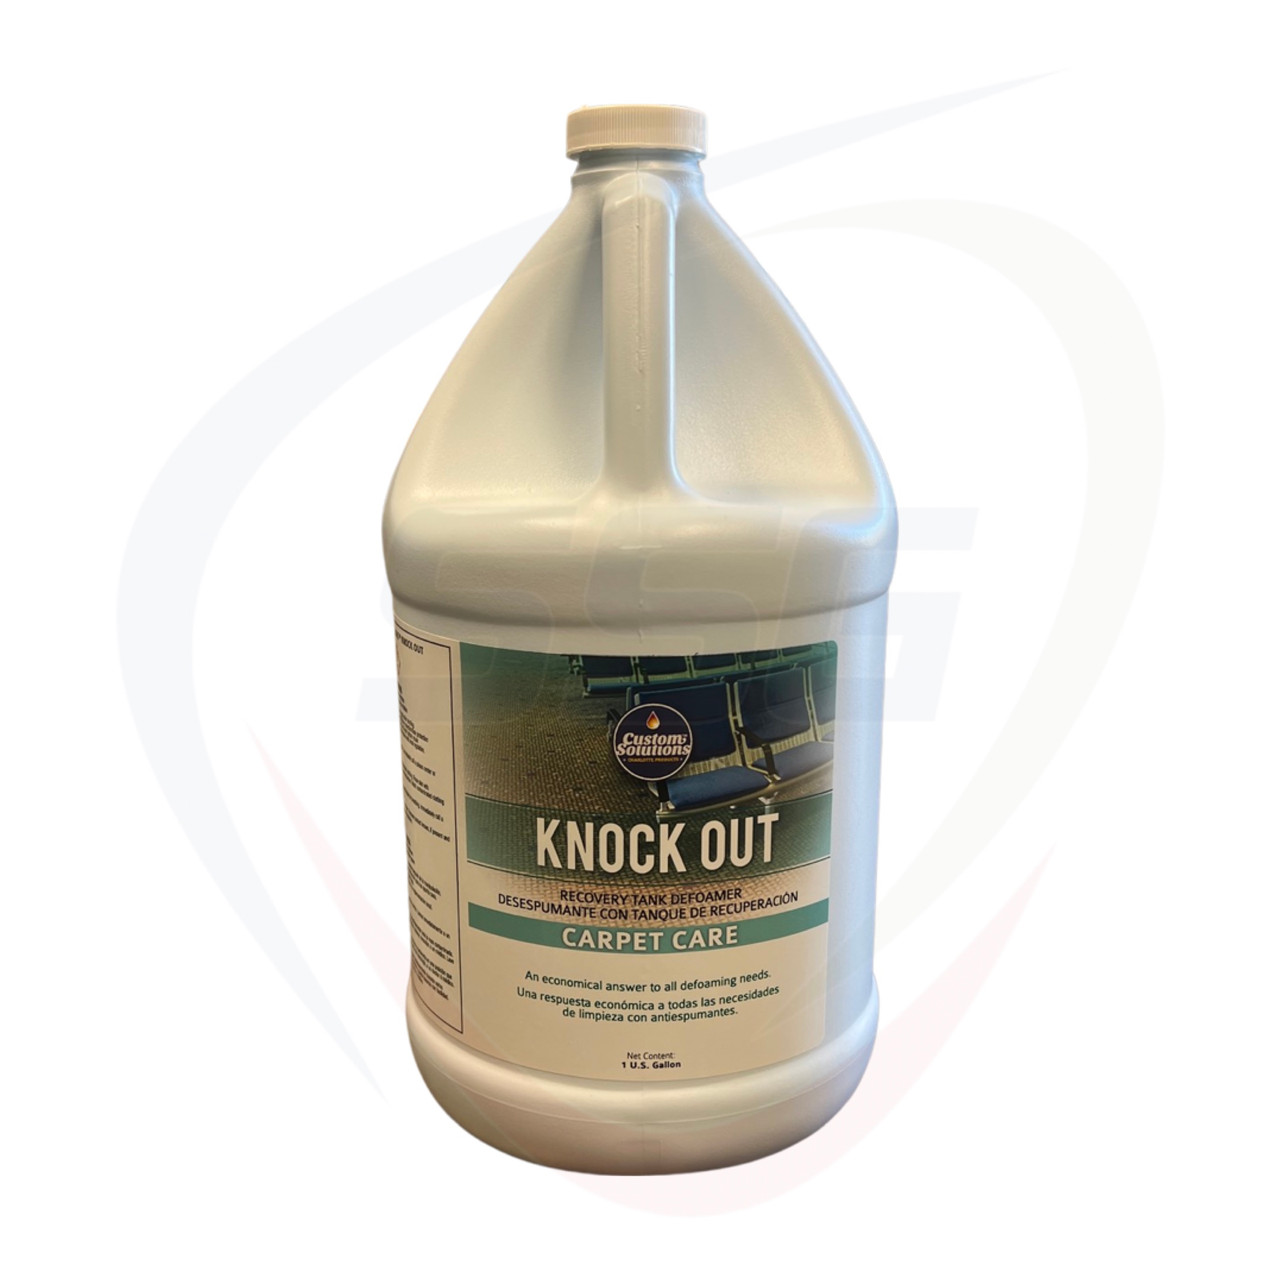 Knock out products